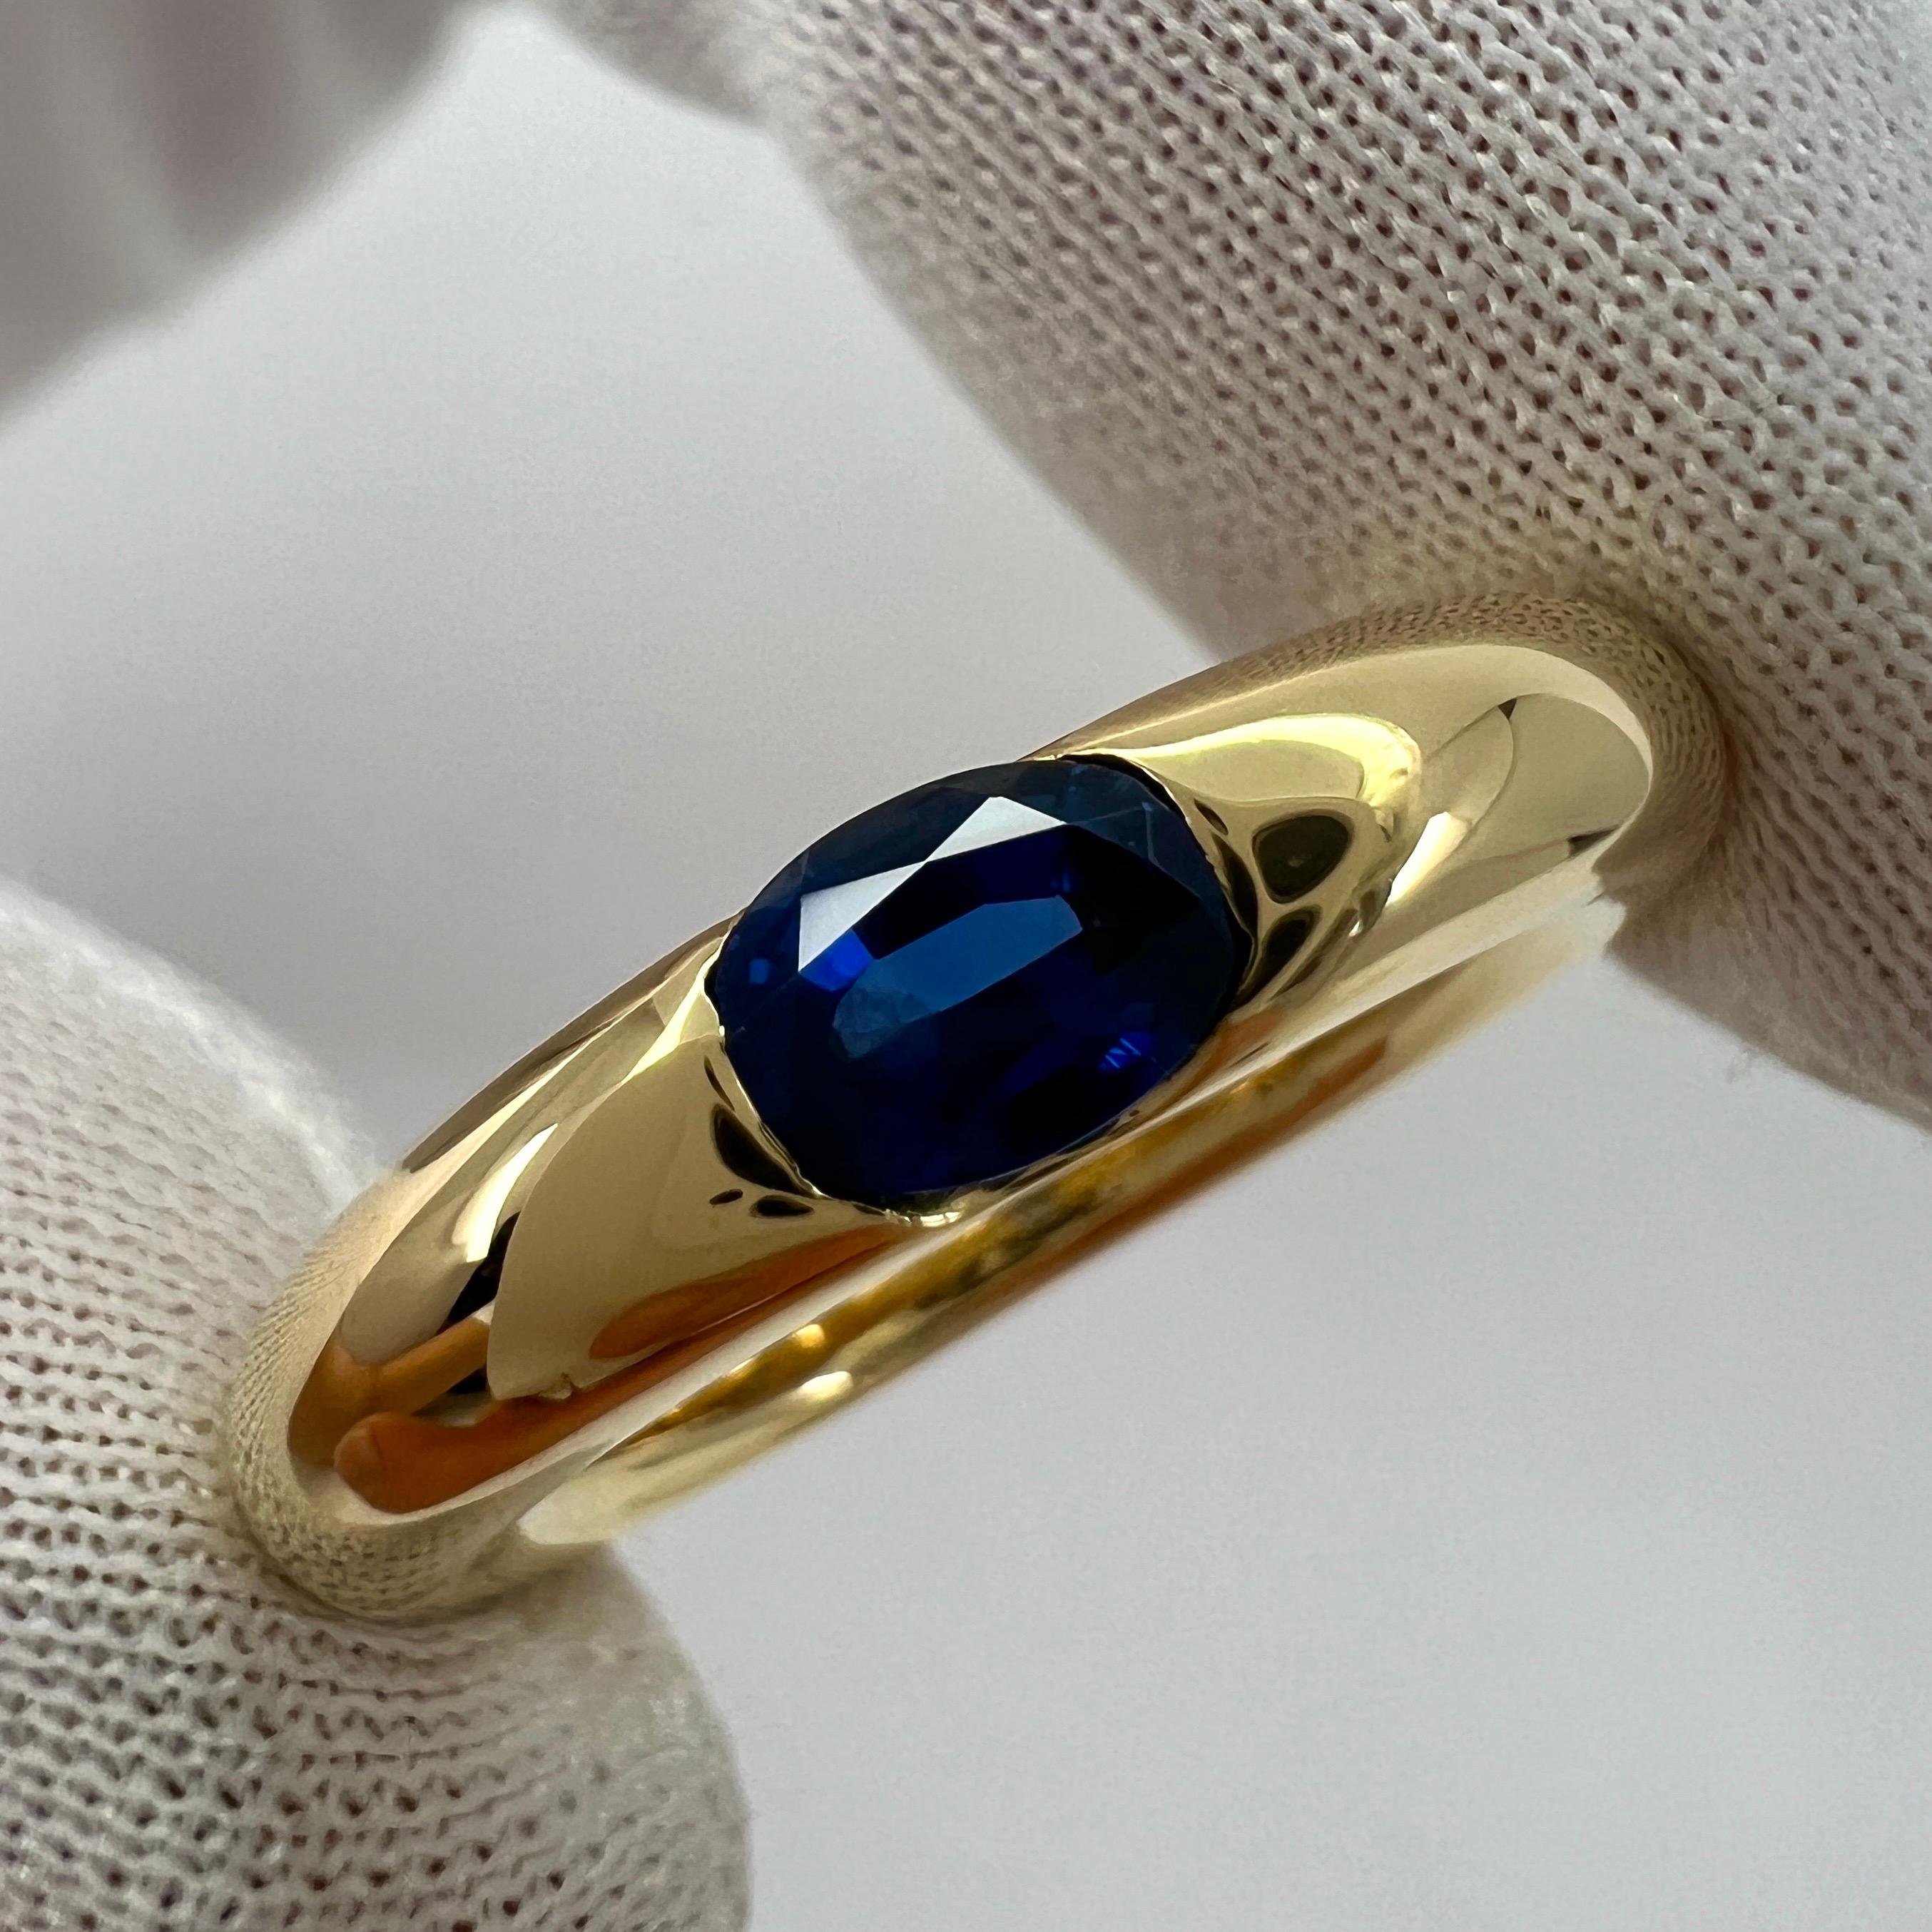 Vintage Cartier Blue Sapphire Oval Ellipse 18k Yellow Gold Solitaire Ring 50 6